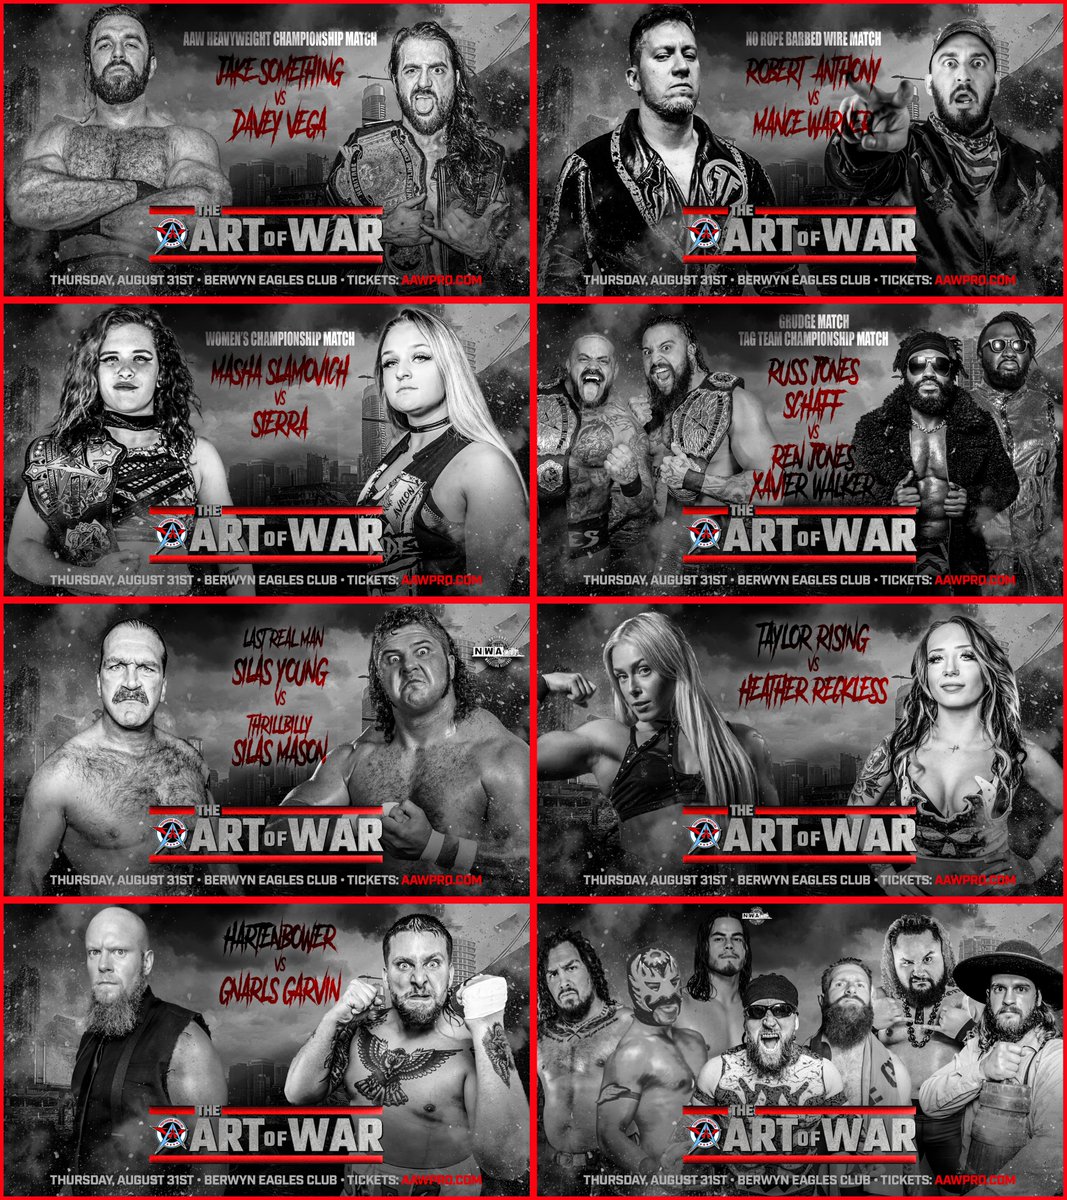 TONIGHT!!! The Art of War 7:30pm Berwyn Eagles Club Berwyn, IL Tickets on sale at the door starting at 6:00pm or online at aawpro.ticketleap.com LIVE on @HighspotsWN #AAWisWar #AAW #Chicago #AEW #AllOut #ProWrestling